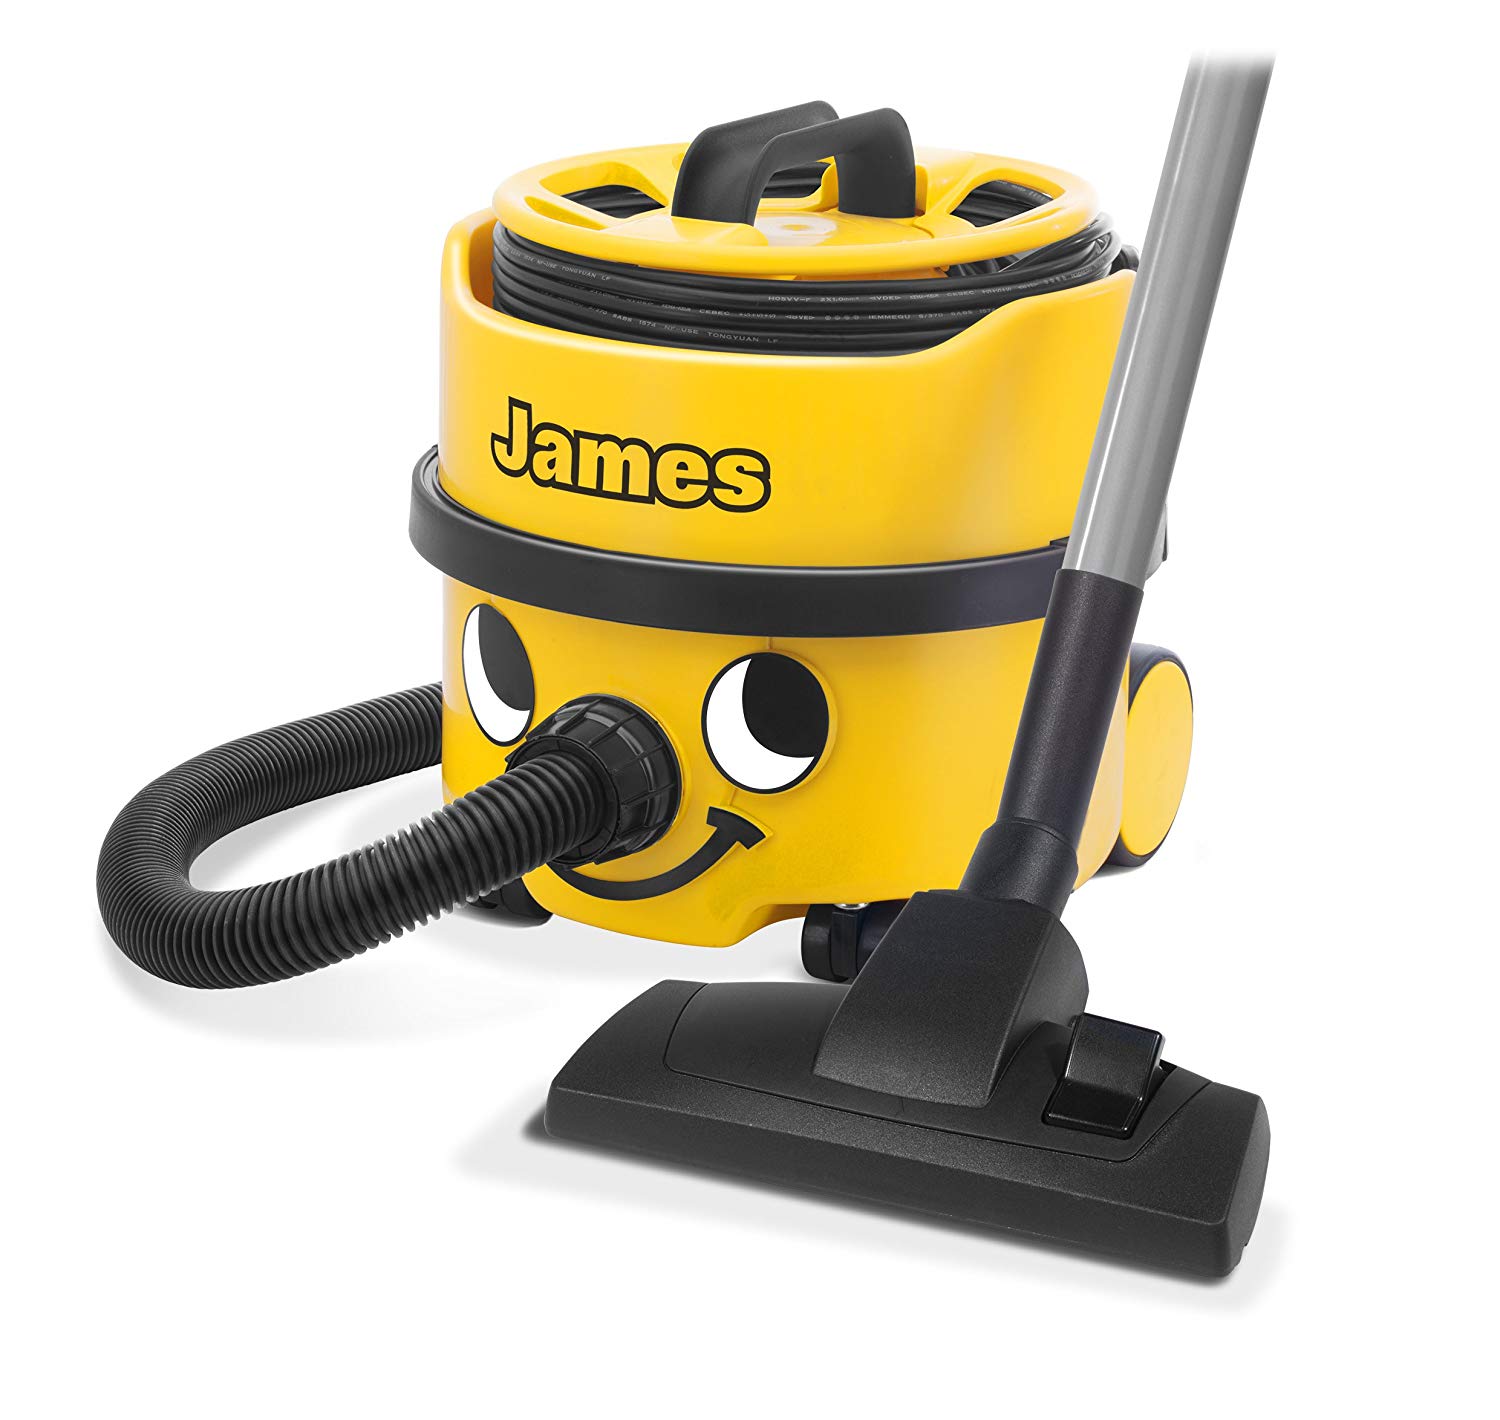 James Hoover Review